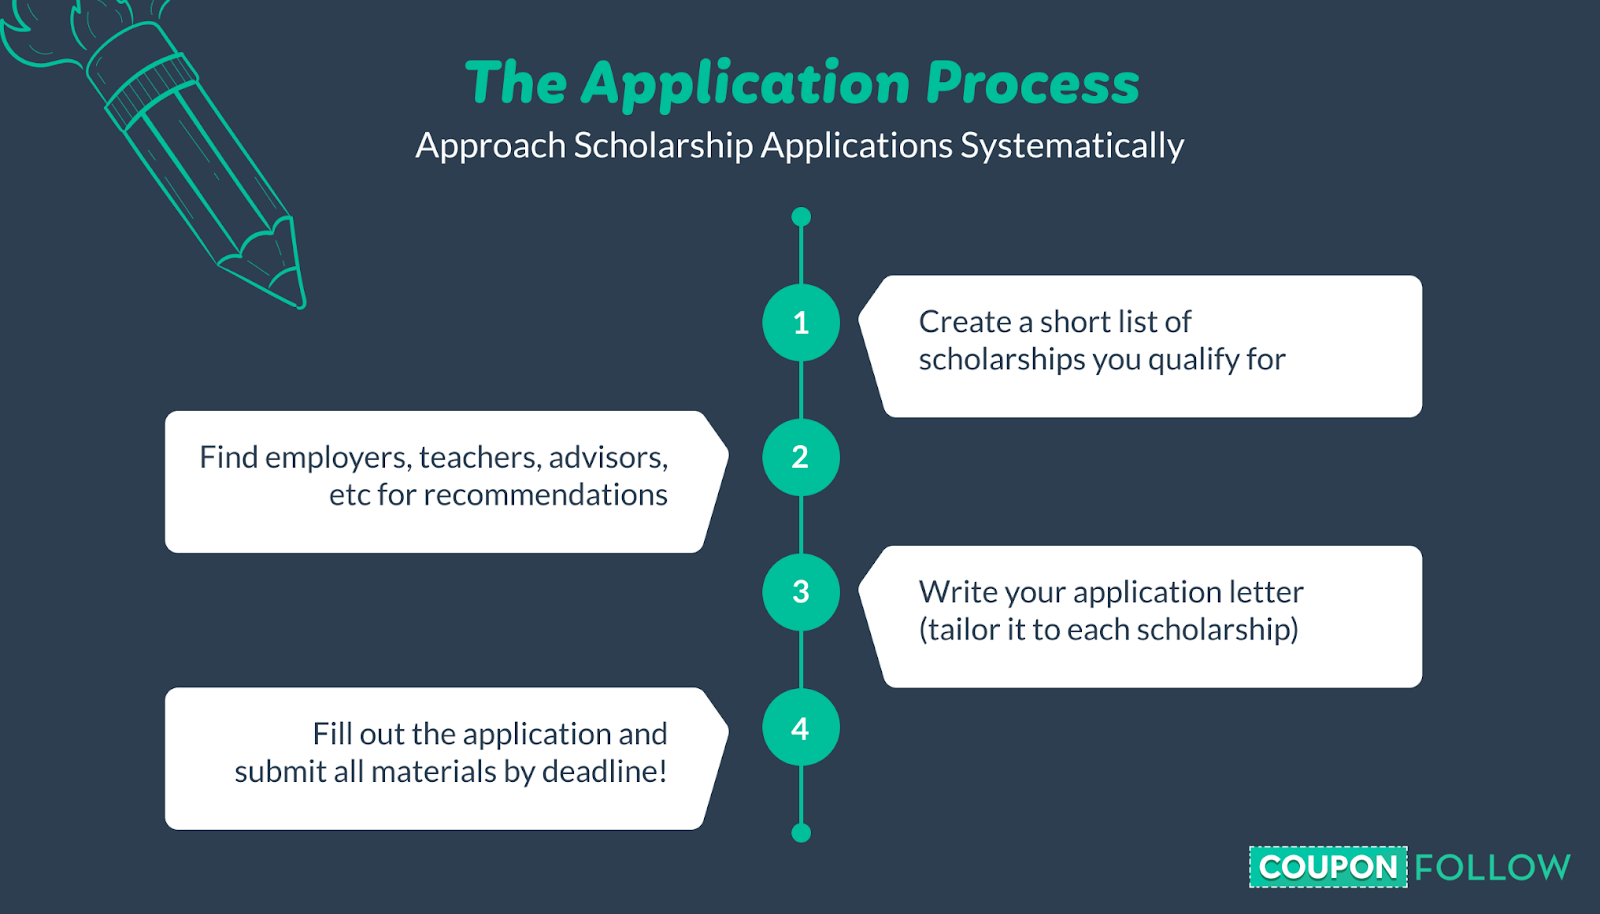 Approach applications systematically